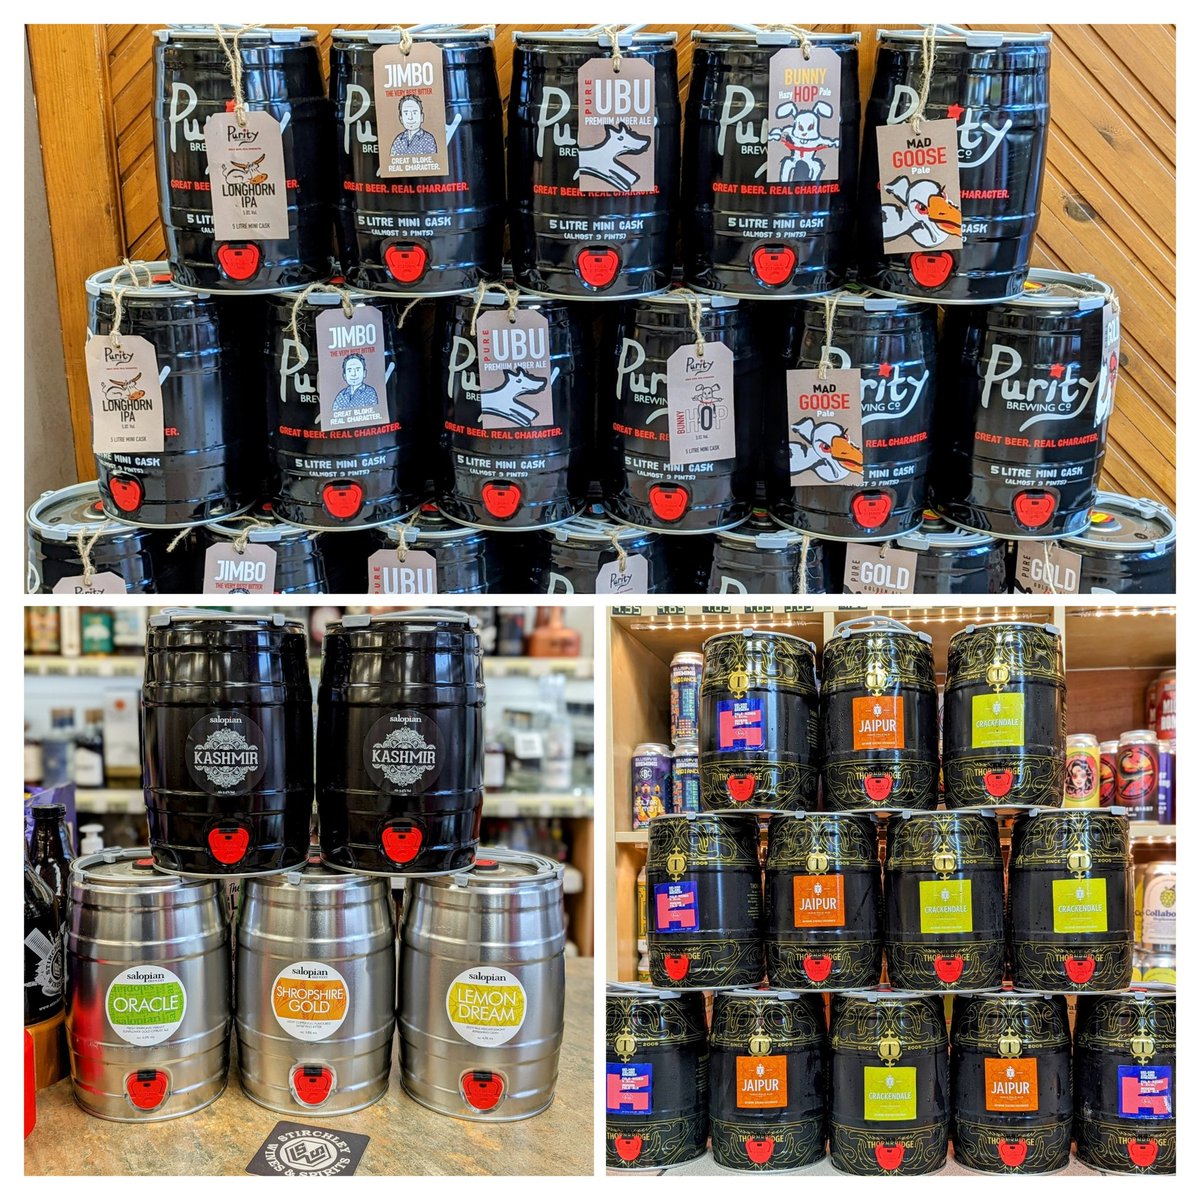 Now's the time to pick up your mini keg in time for the festive season!

Plenty to choose from including beers from @thornbridge @PurityBrewingCo @SalopianBrewery and @KelhamBrewery.

Be quick, they won't be around for long!

#VivaStirchley #VivaBrum #ShopIndependent #SWSXmas🎄